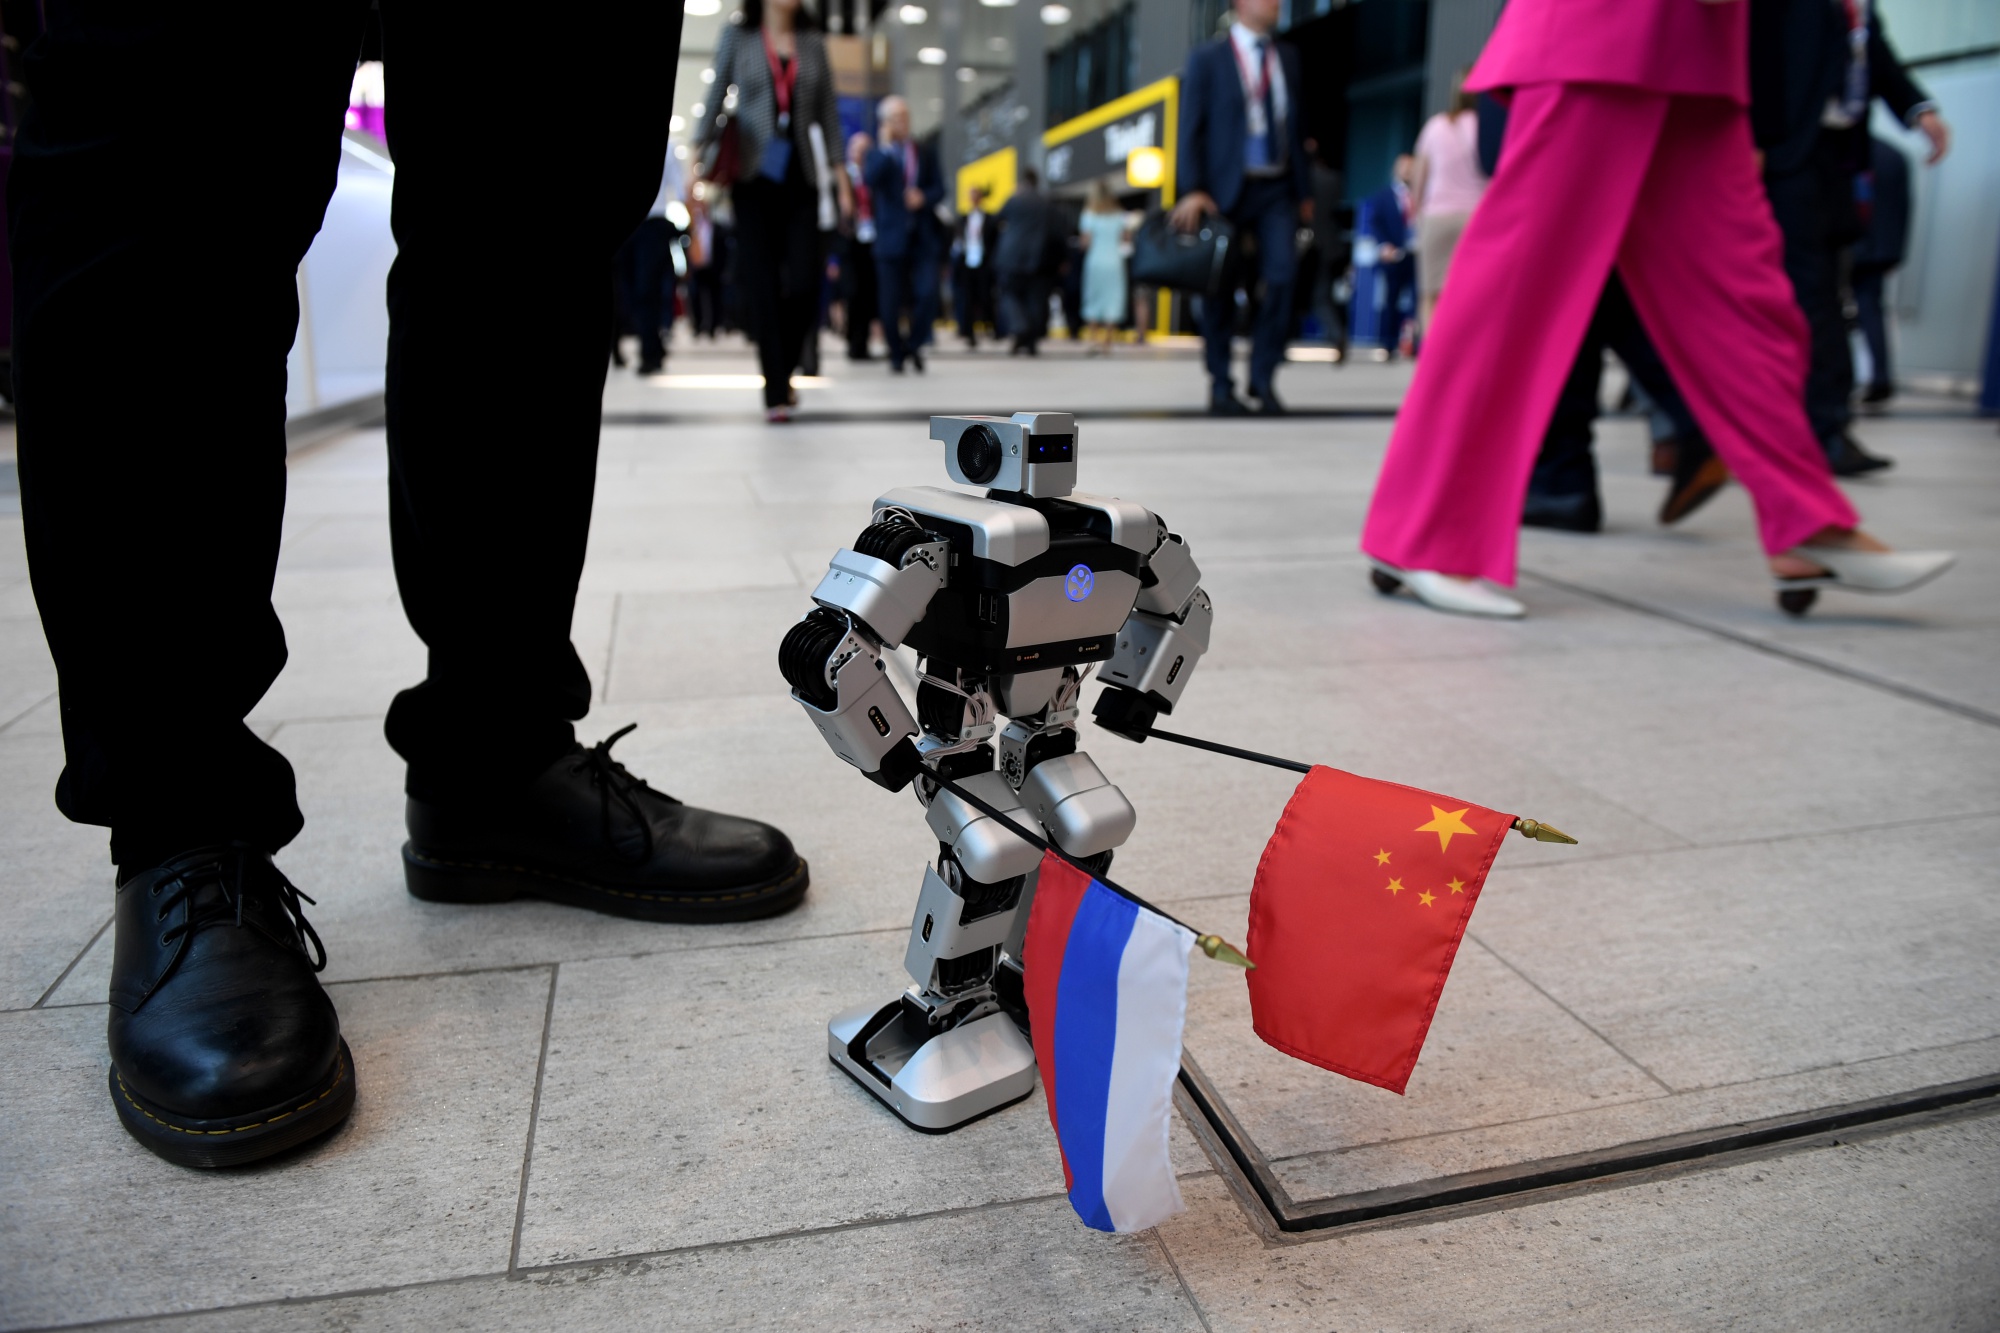 A mini-robot carries the flags of Russia and China in the main hall during the St. Petersburg International Economic Forum in Russia in 2019.&nbsp;